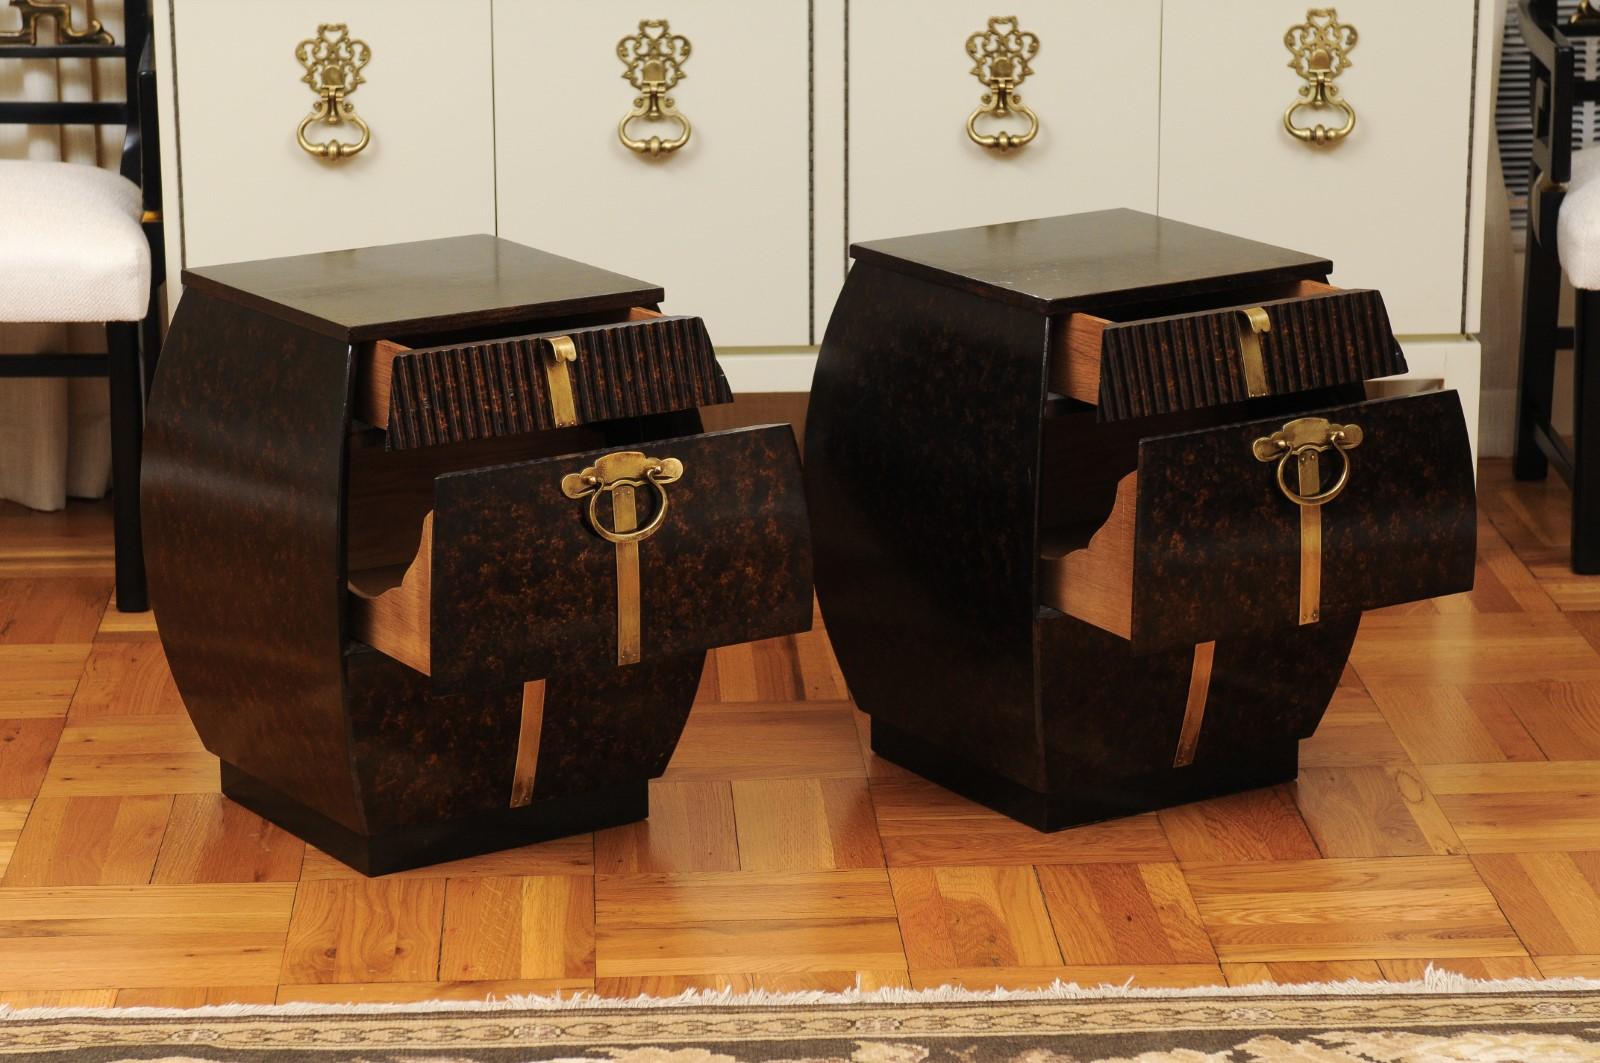 Exquisite Pair of Bombe Small Chests by Bert England for Widdicomb, circa 1965 For Sale 4